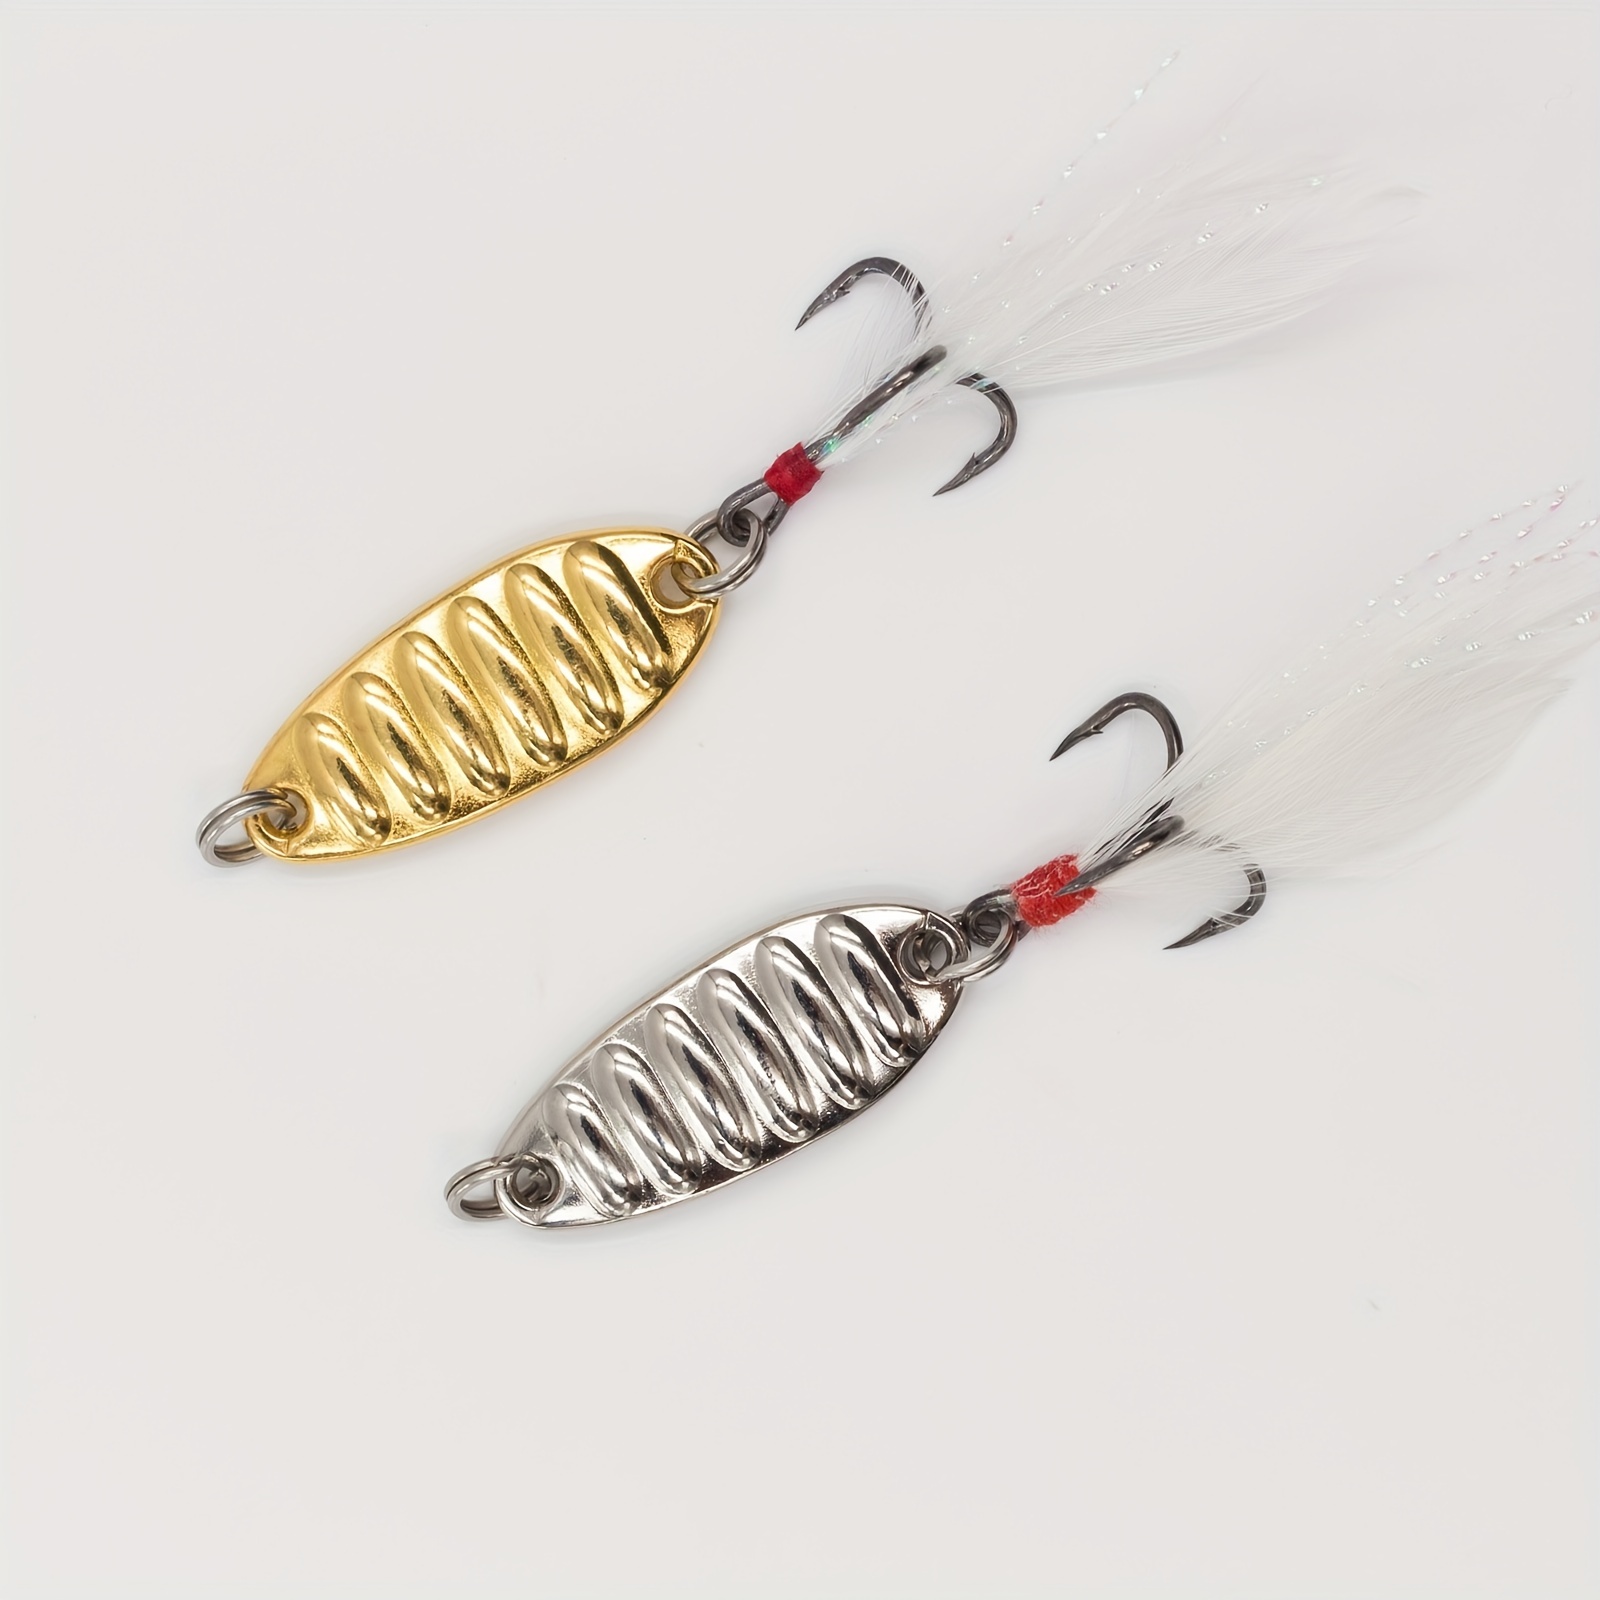 1pcs Metal Gold Sliver Spoon Lure Spinner 1.5G 3G 7G 10G 15G 20G Fishing  Lures Sequins Hard Baits Bass Pike Fishing Tackle - AliExpress